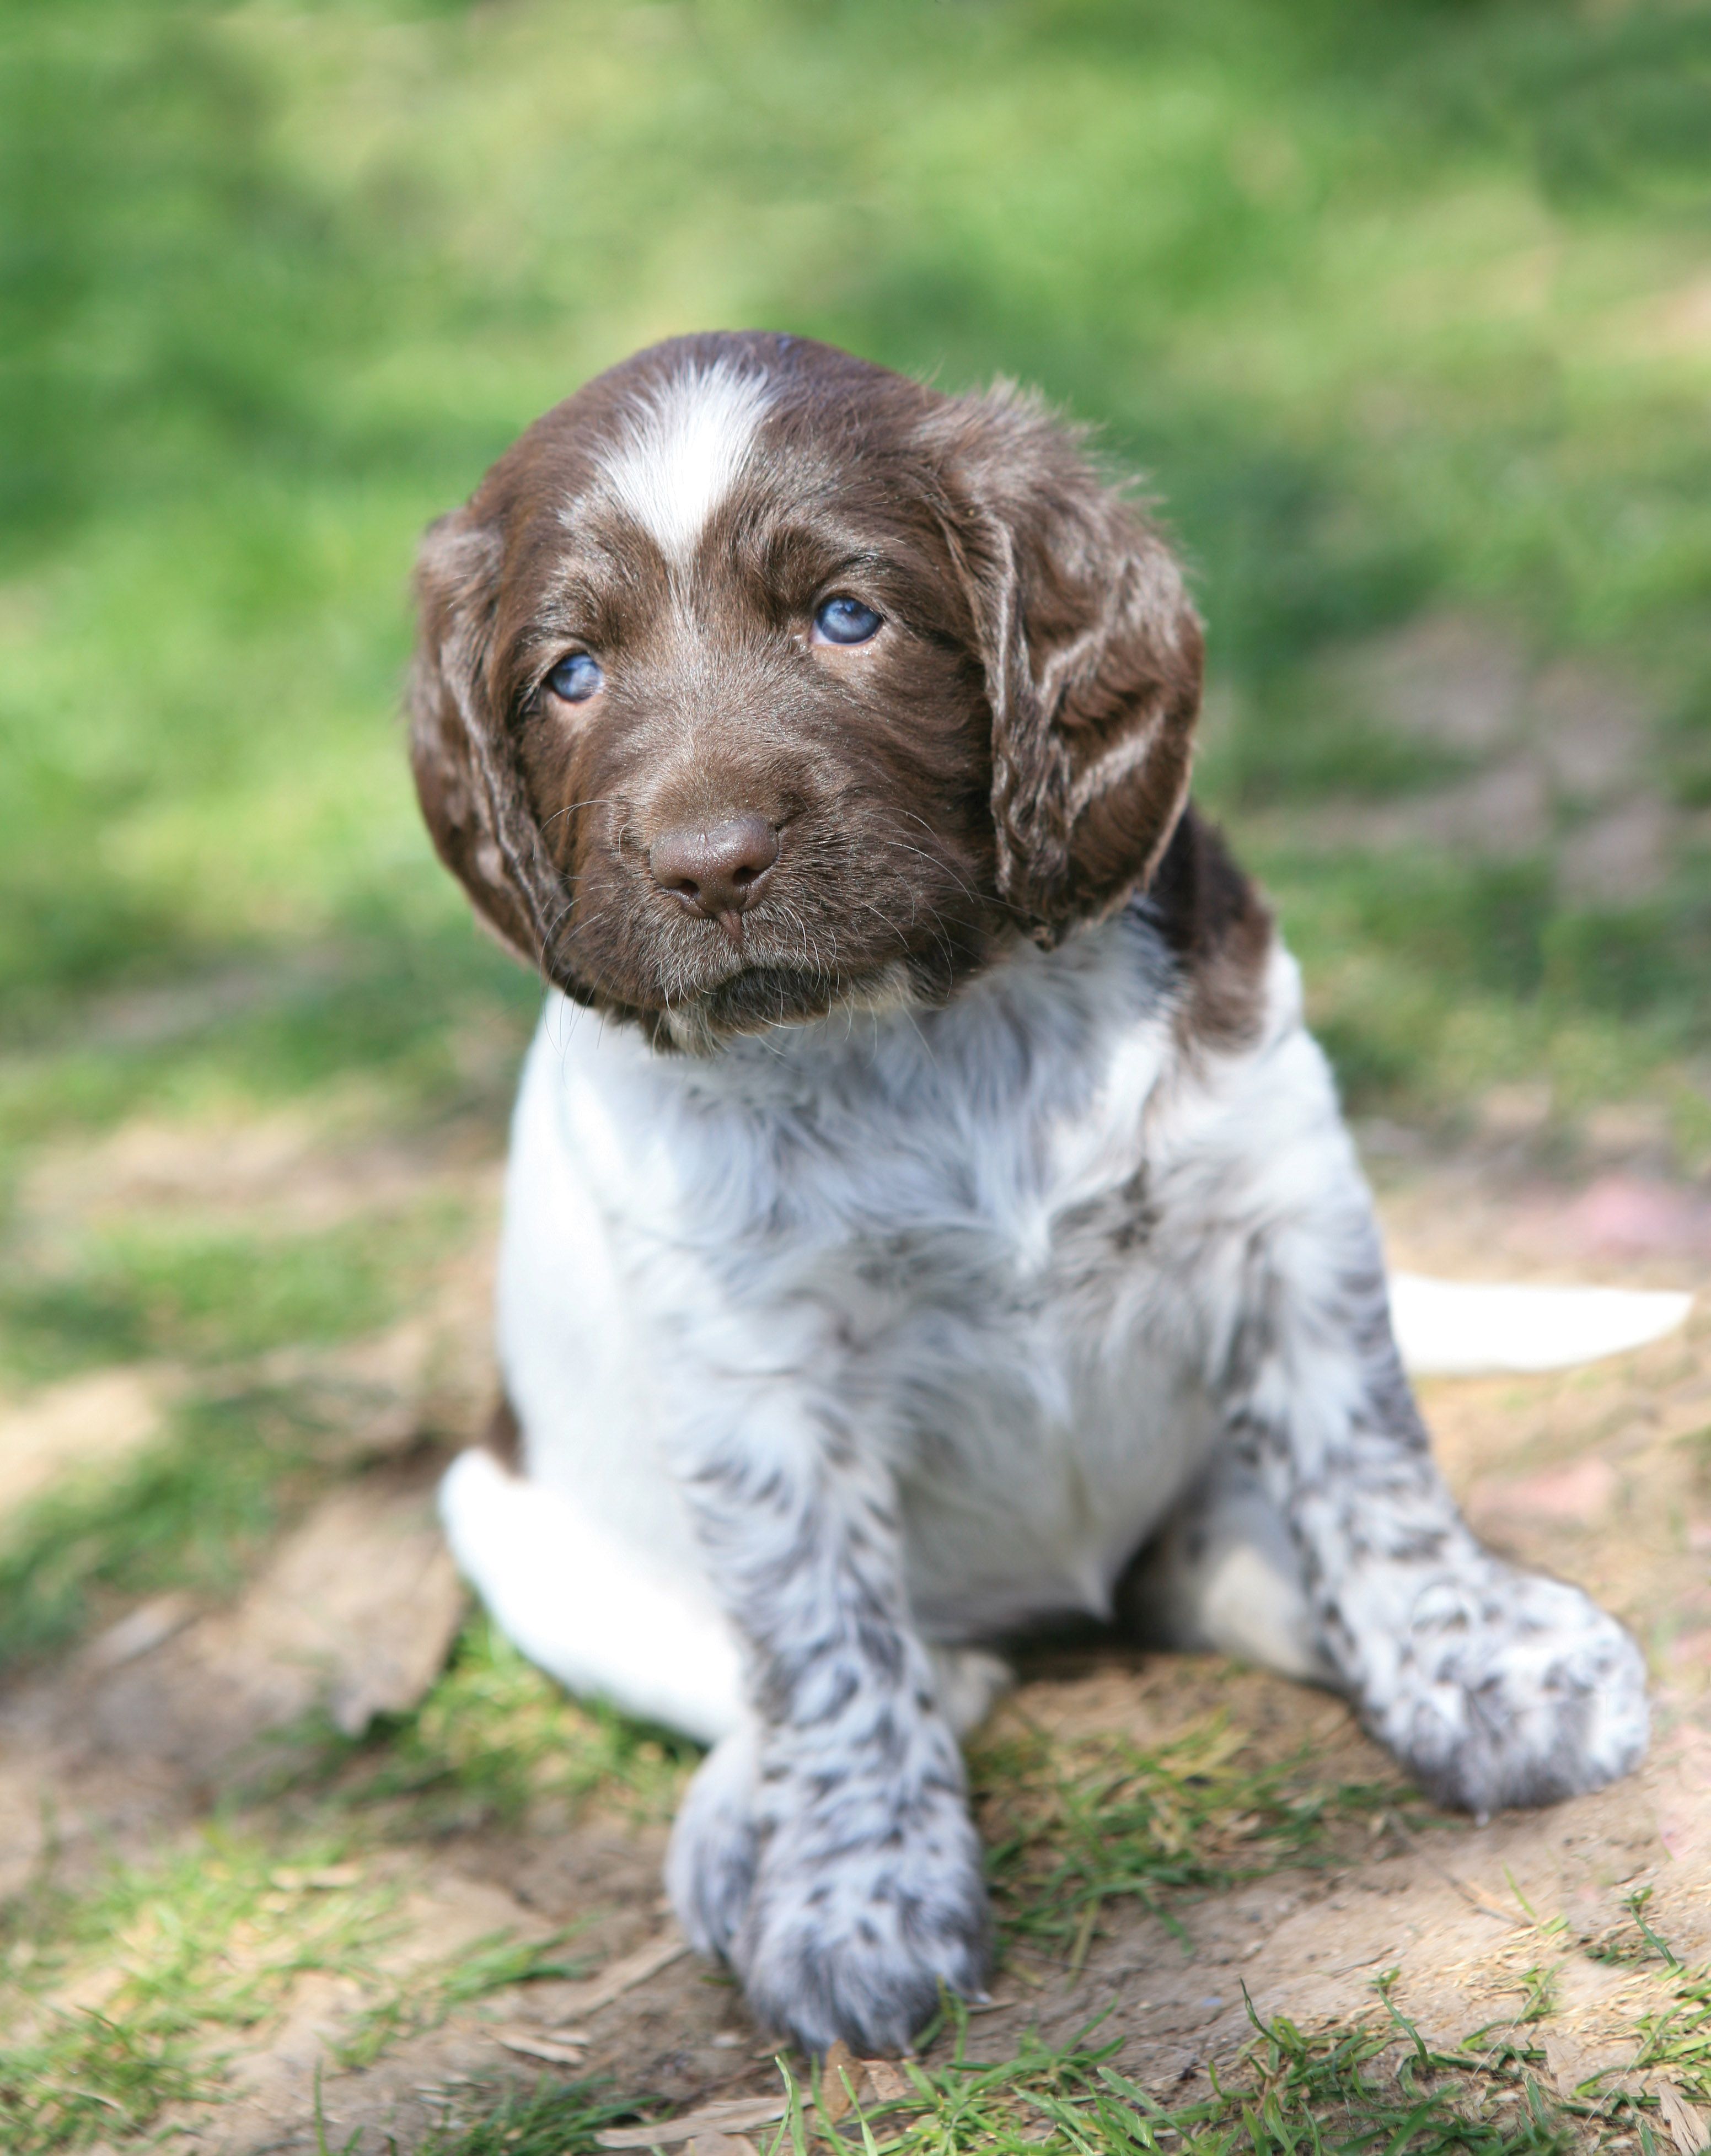 German Shorthaired Pointer puppy photo and wallpaper. Beautiful German Shorthaired Pointer puppy picture